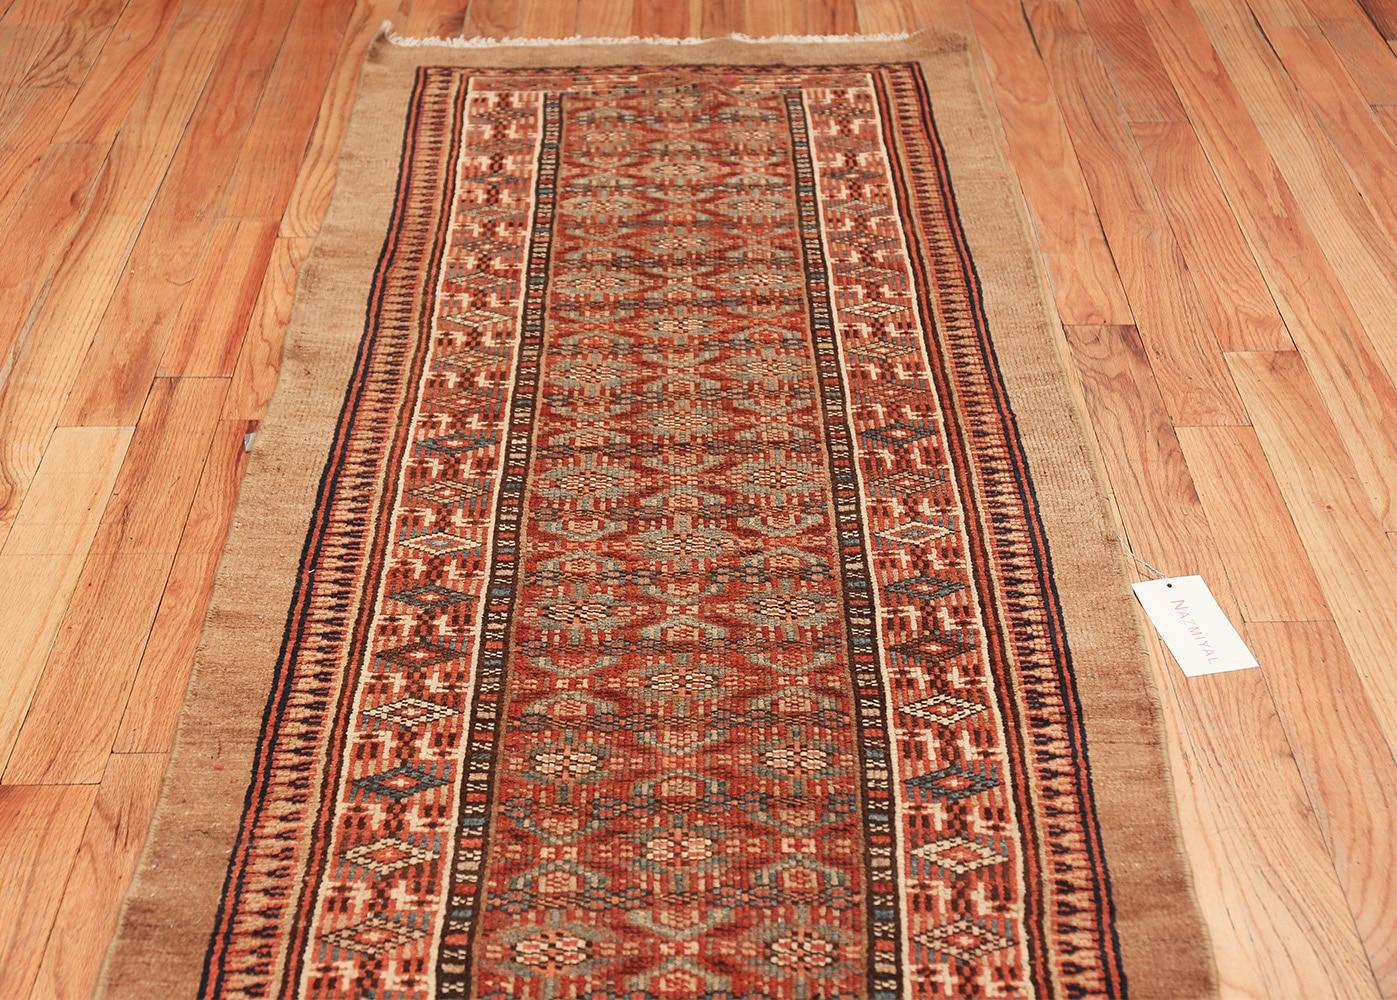 Wool Tribal Long and Narrow Antique Persian Serab Runner Rug. Size: 2 ft 8 in x 16 ft